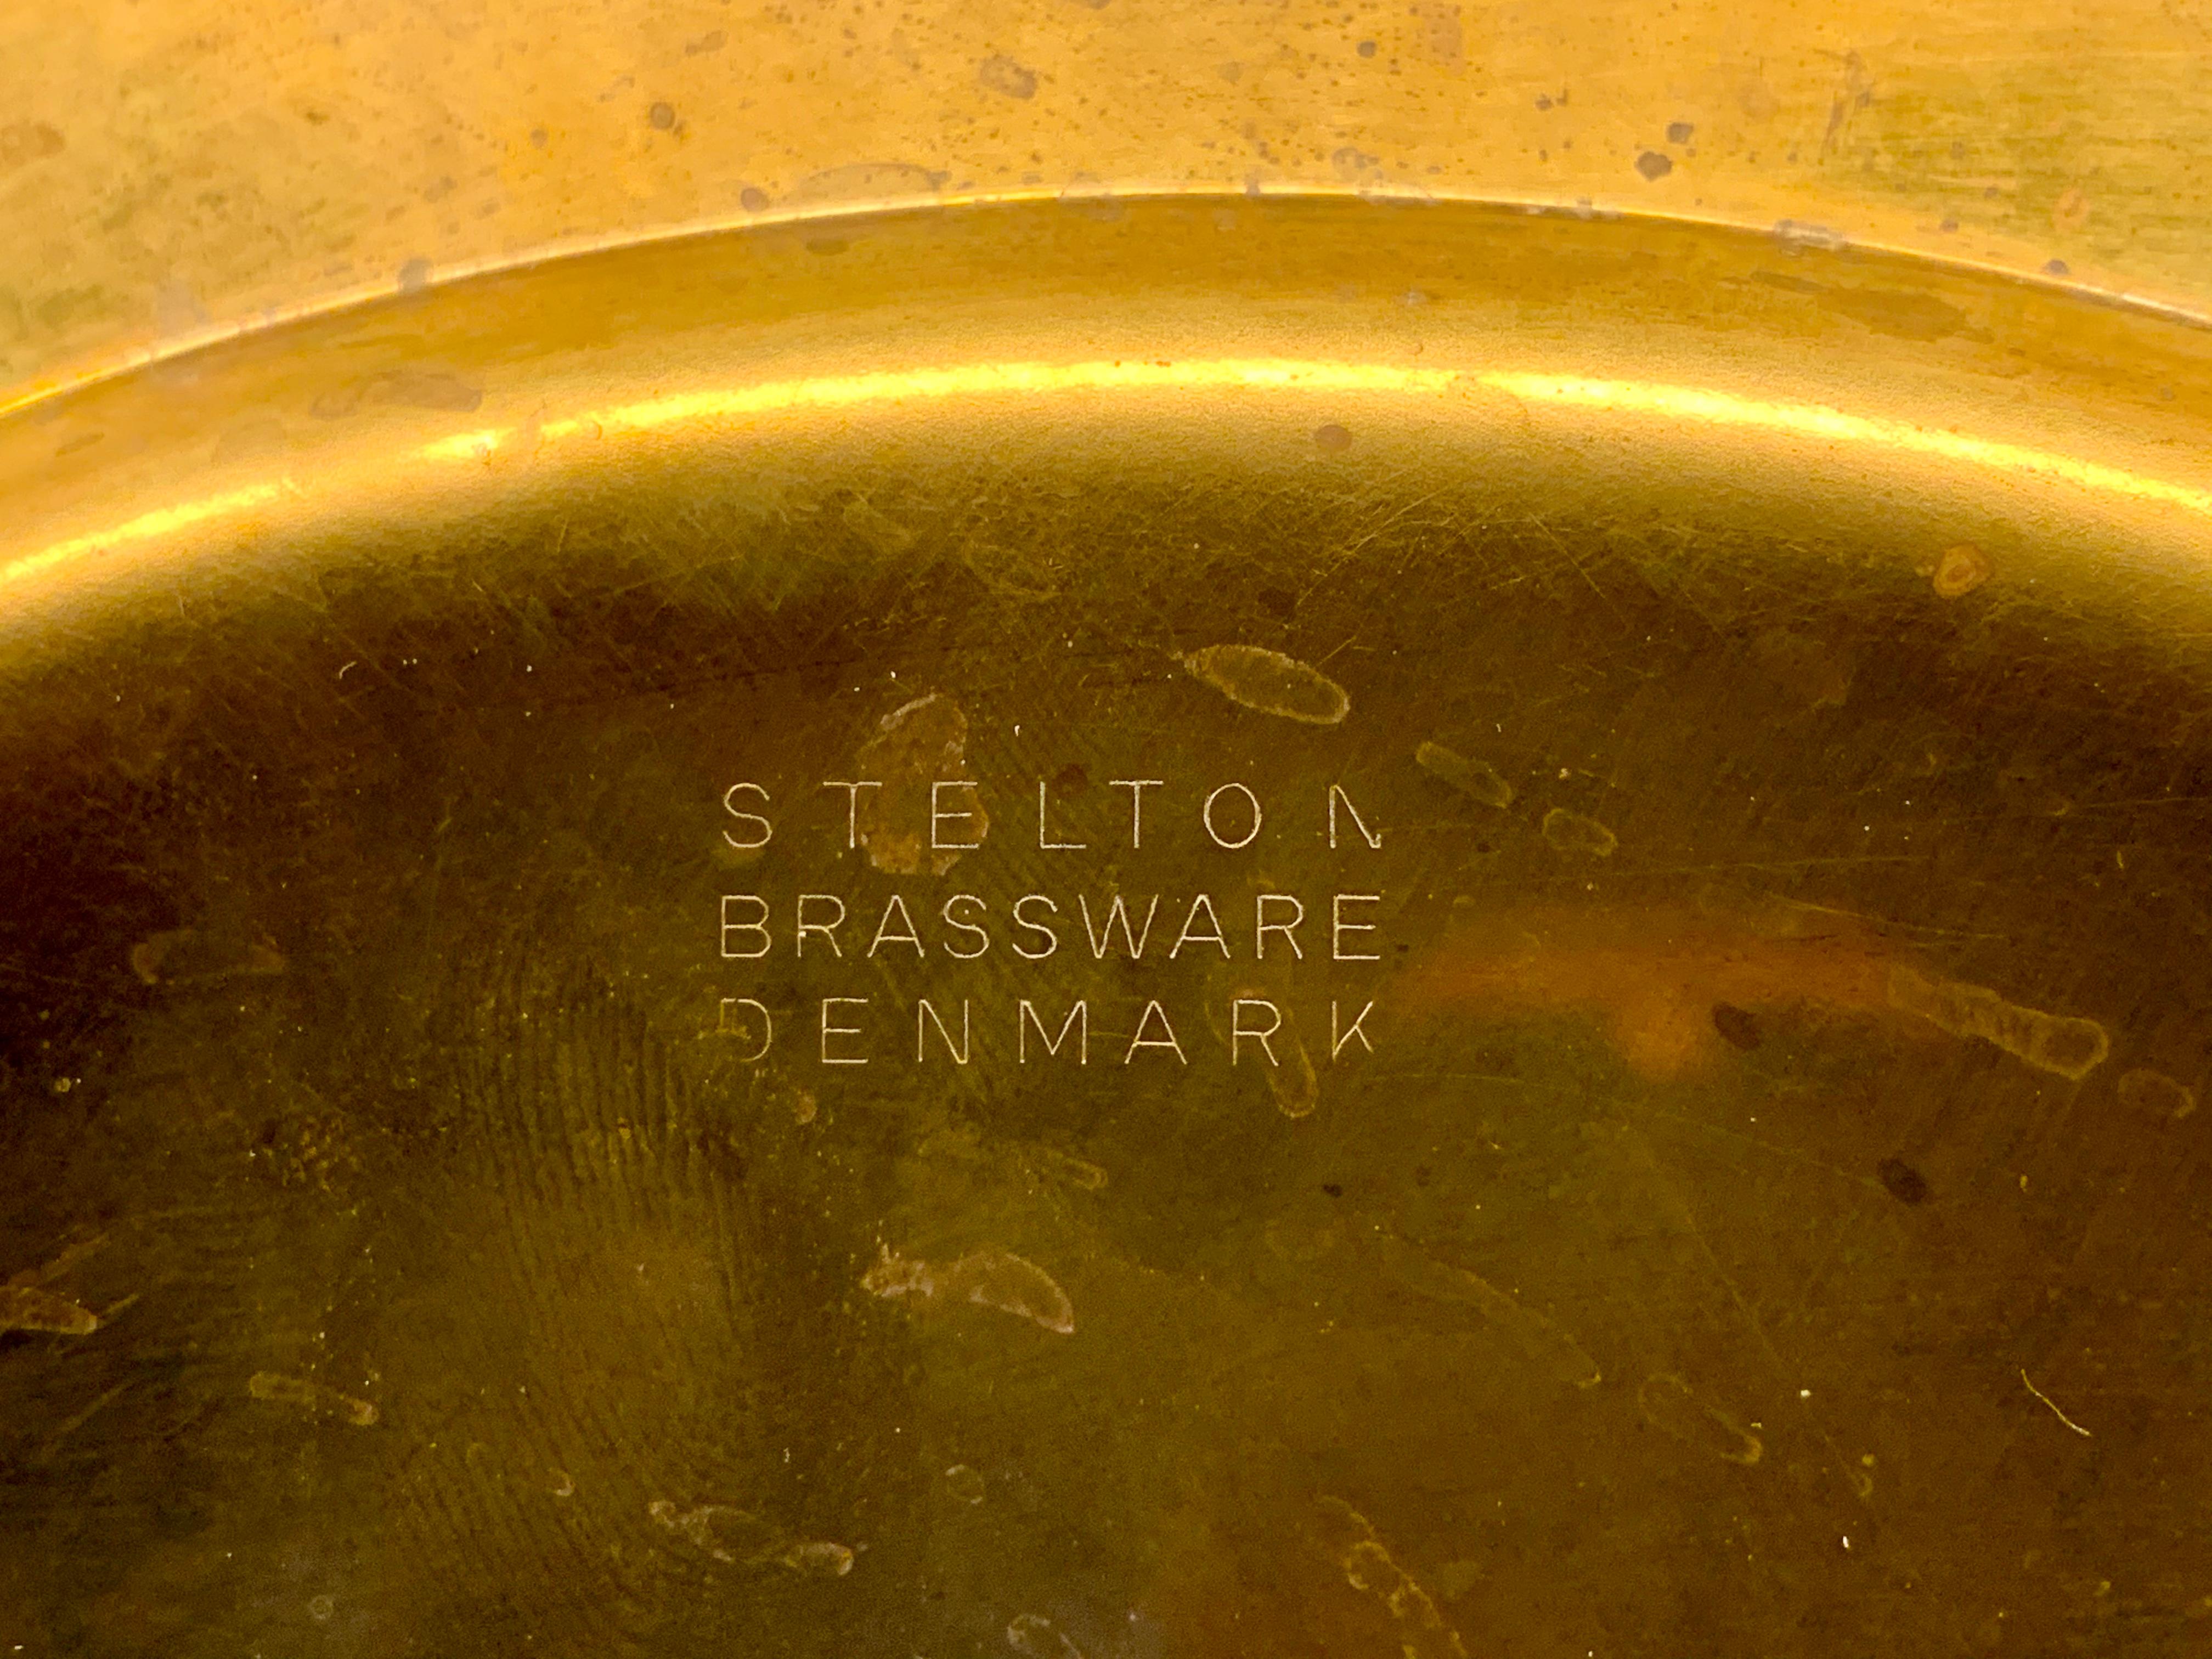 Set of twelve coaster dining brass plates produced in midcentury by Stelton in Denmark.